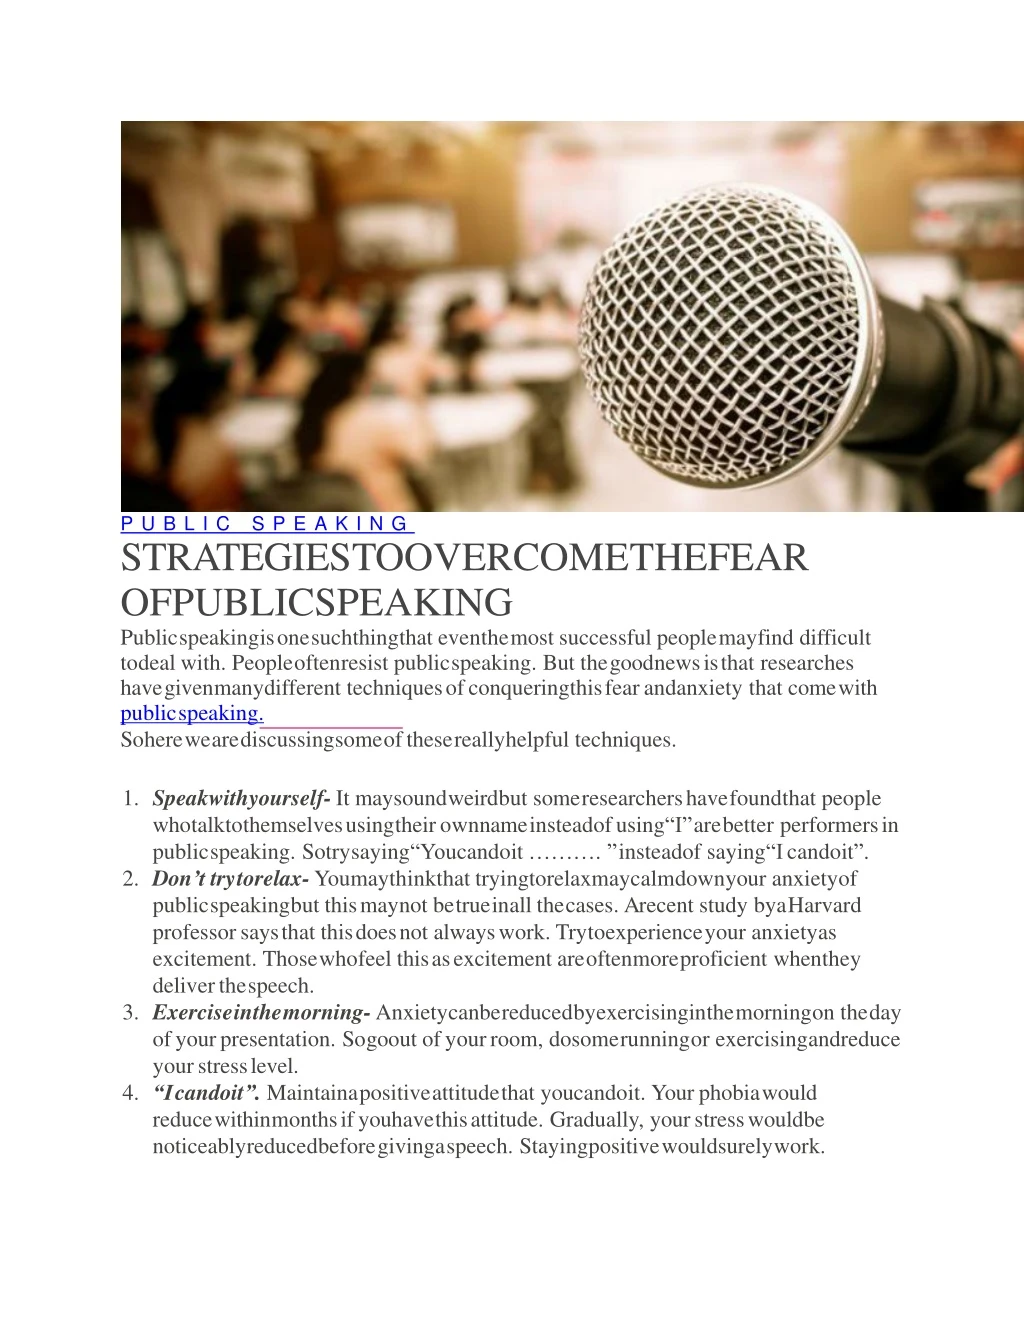 public speaking strategies to overcome the fear